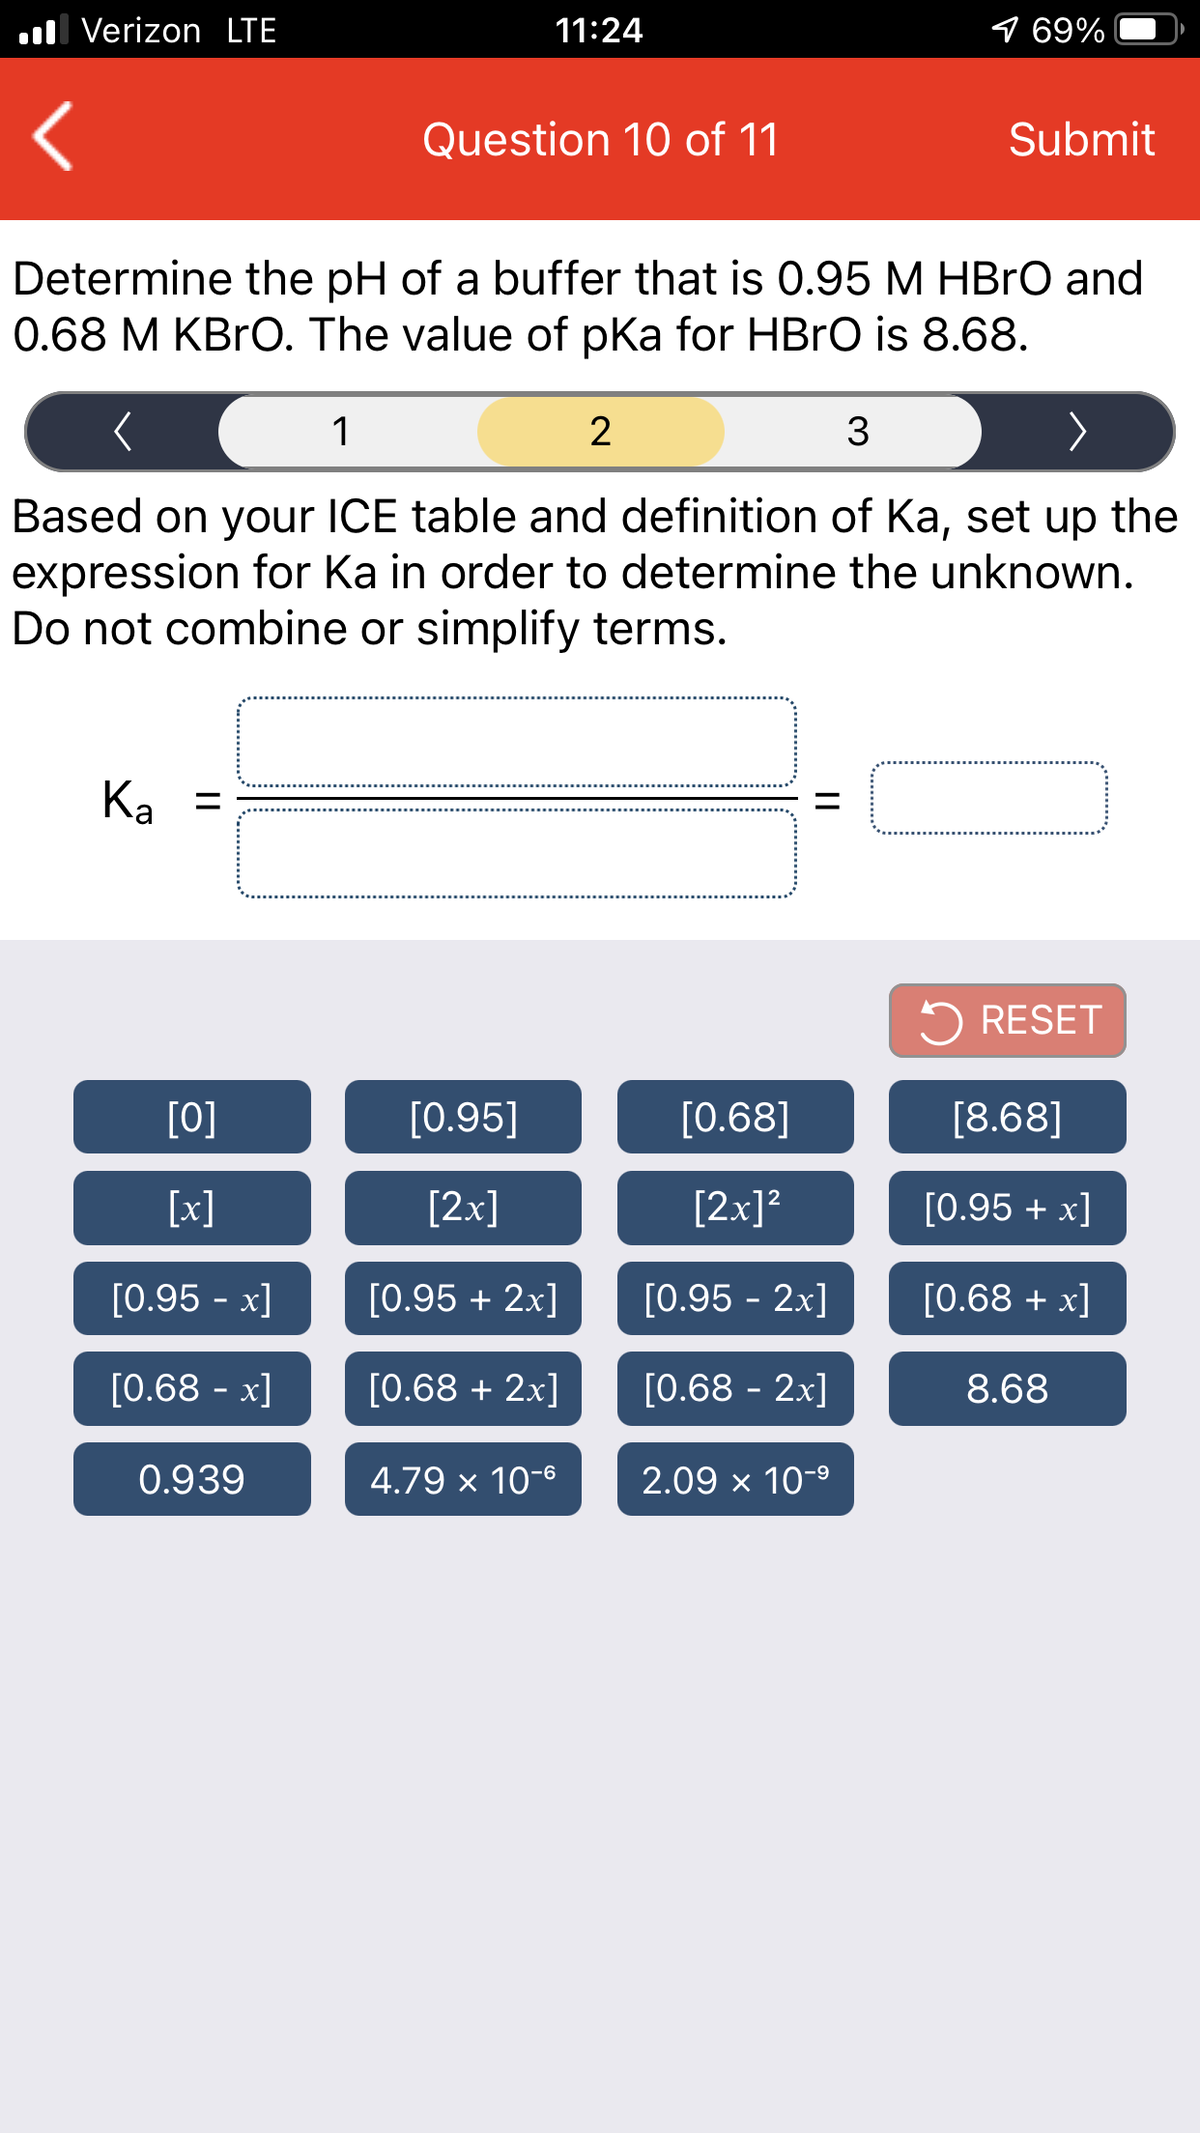 ul Verizon LTE
11:24
9 69%
Question 10 of 11
Submit
Determine the pH of a buffer that is 0.95 M HBRO and
0.68 M KBRO. The value of pka for HBRO is 8.68.
1
Based on your ICE table and definition of Ka, set up the
expression for Ka in order to determine the unknown.
Do not combine or simplify terms.
Ка
Ka =
5 RESET
[0]
[0.95]
[0.68]
[8.68]
[x]
[2x]
[2x]?
[0.95 + x]
[0.95 - x]
[0.95 + 2x]
[0.95 - 2x]
[0.68 + x]
[0.68 - x]
[0.68 + 2x]
[0.68 - 2x]
8.68
0.939
4.79 x 10-6
2.09 x 10-9
